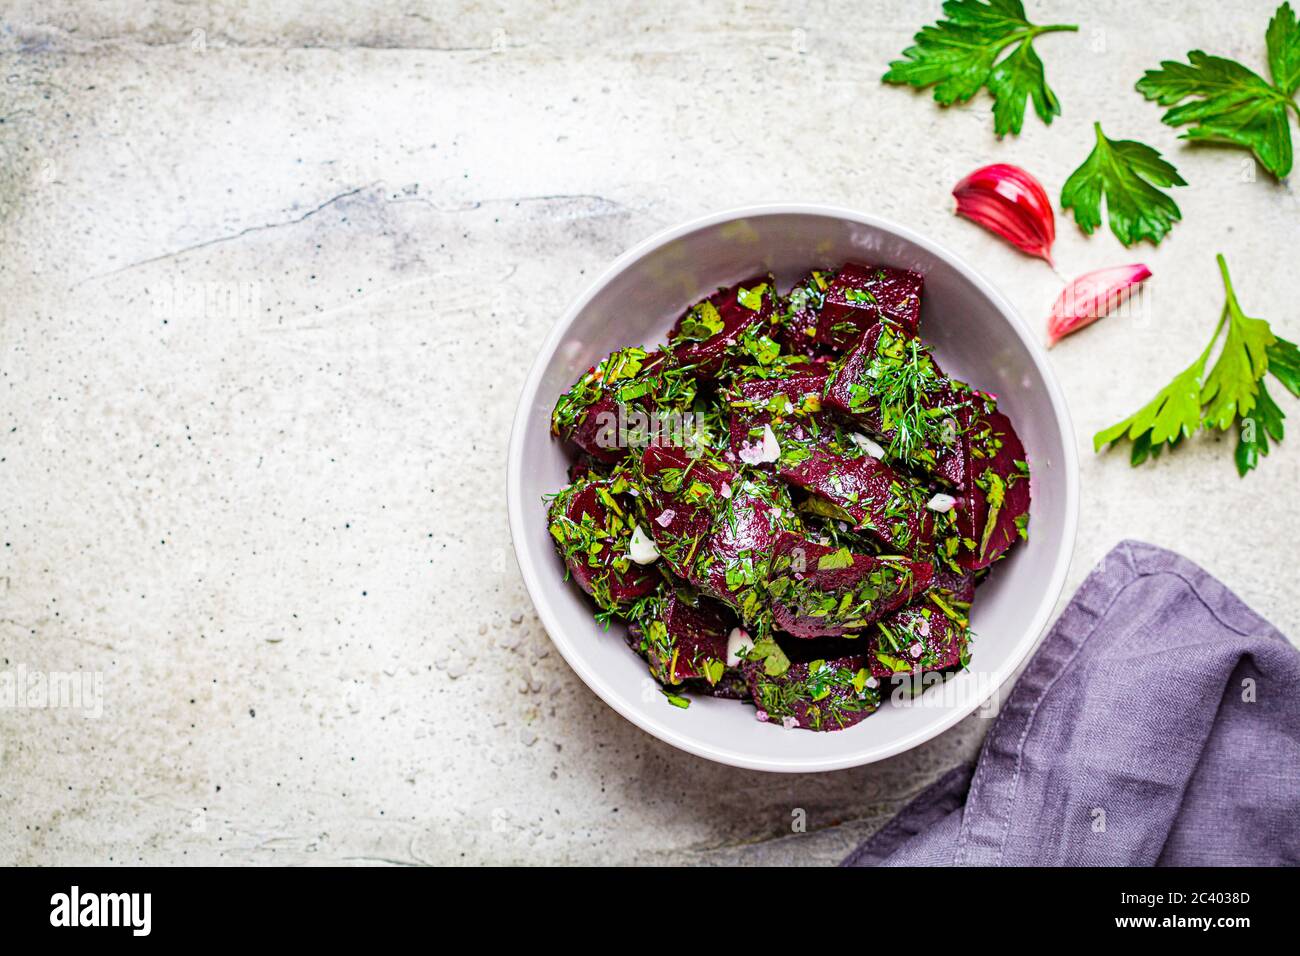 Beetroot salad with garlic and herbs in a gray bowl on a light background. Stock Photo